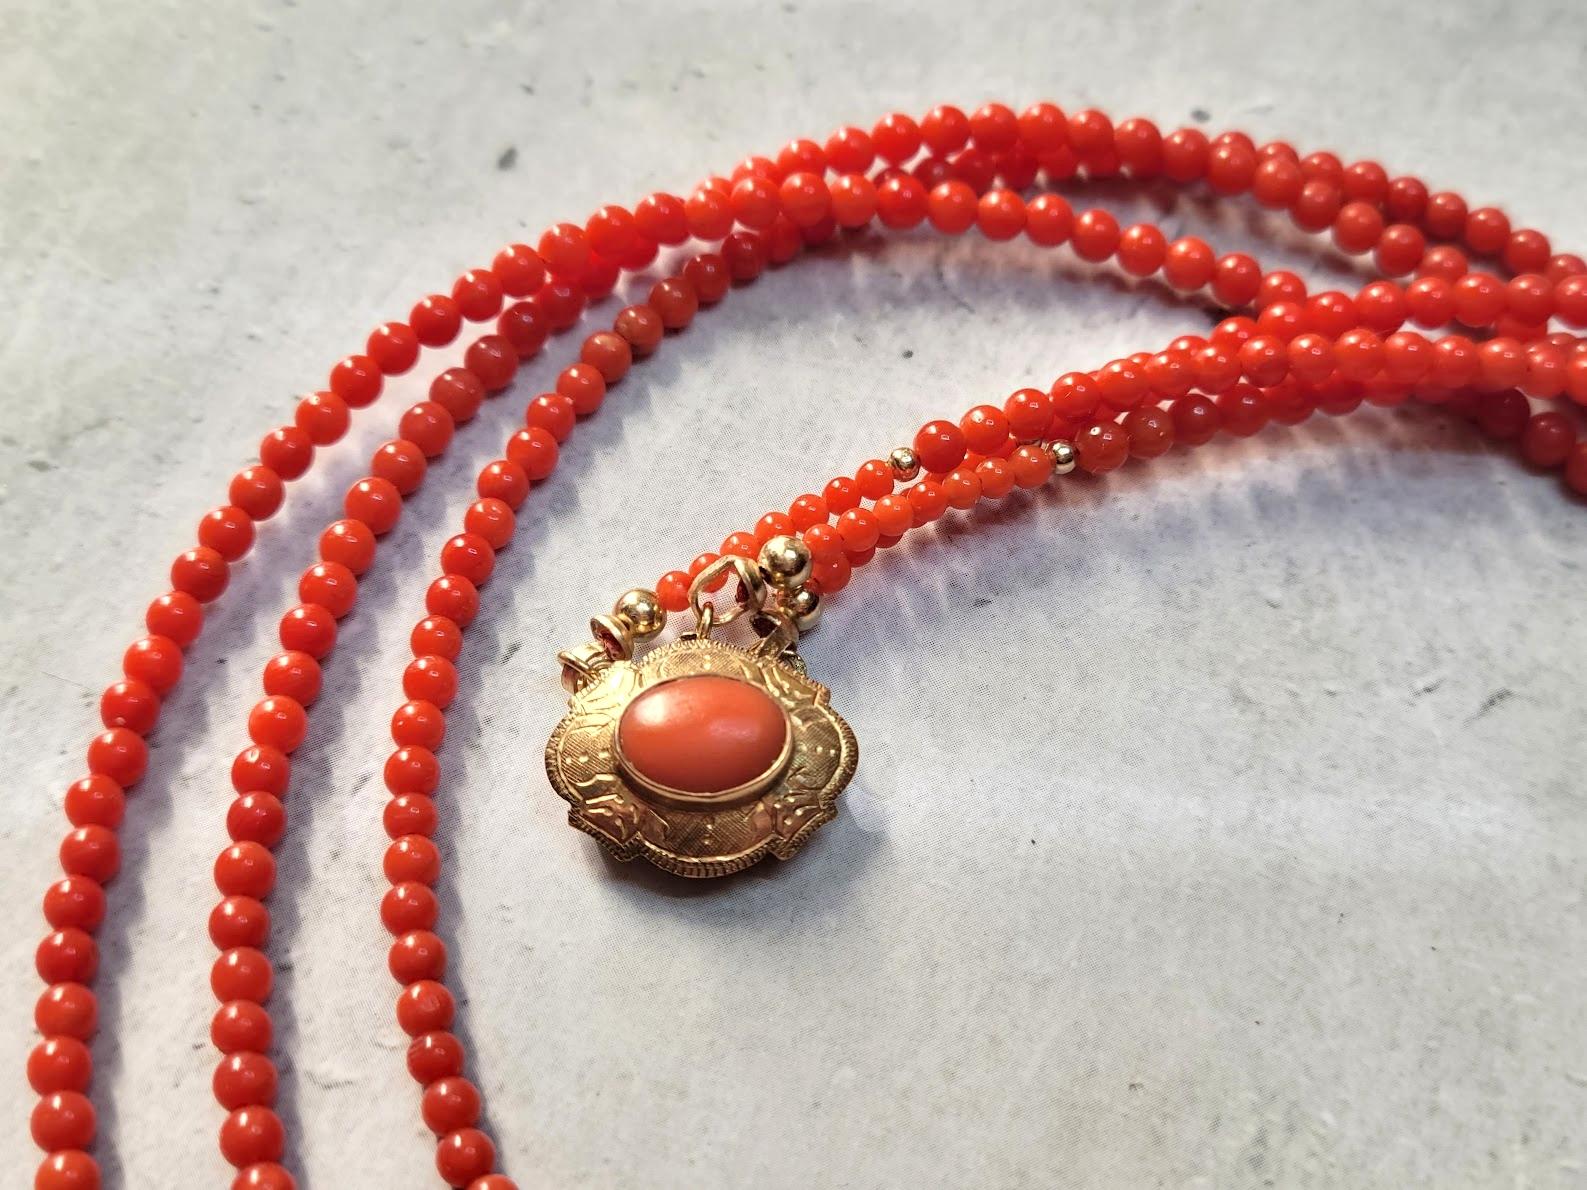 A 3-strand antique coral necklace very exceptional necklace.
The length of the necklace is 18.5 inches (47 cm).
The size of the round, smooth tiny coral beads is 3.2mm. The size of small coral beads around the clasp is 2mm. The size 14k gold beads